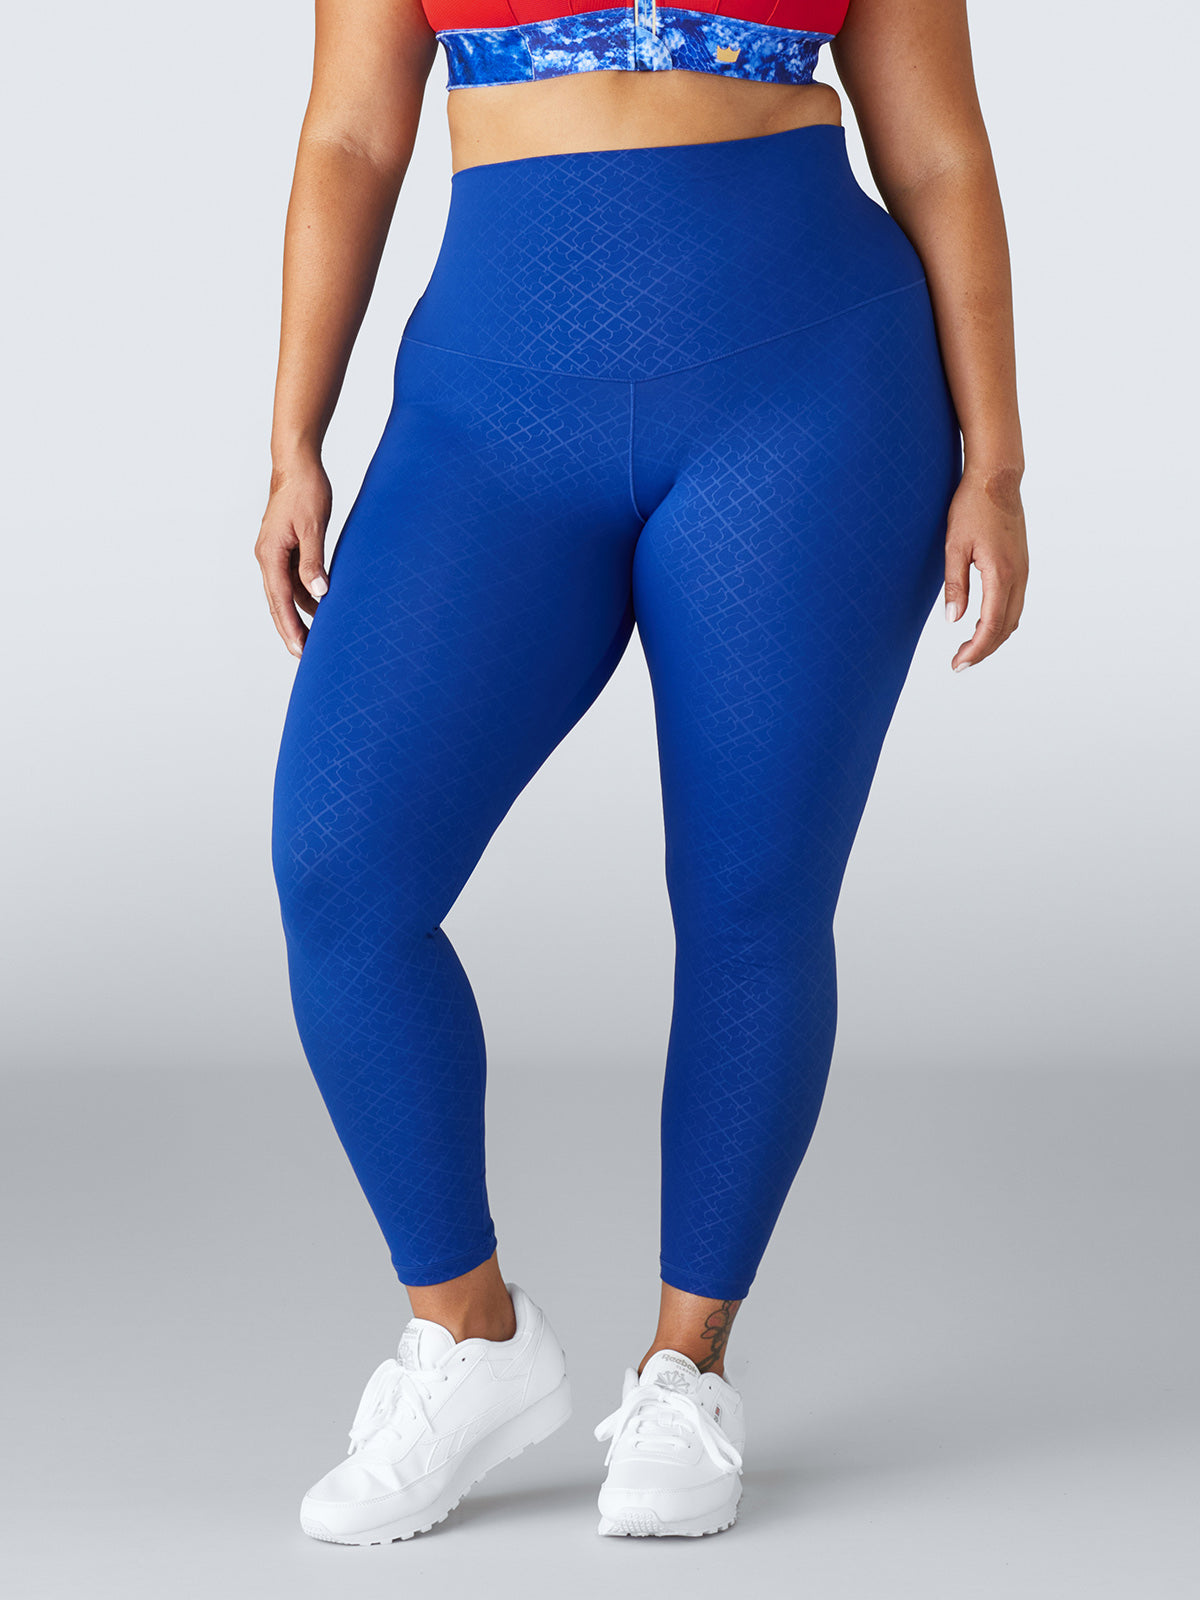 Letsfit High-Waisted Leggings Review - PureWow